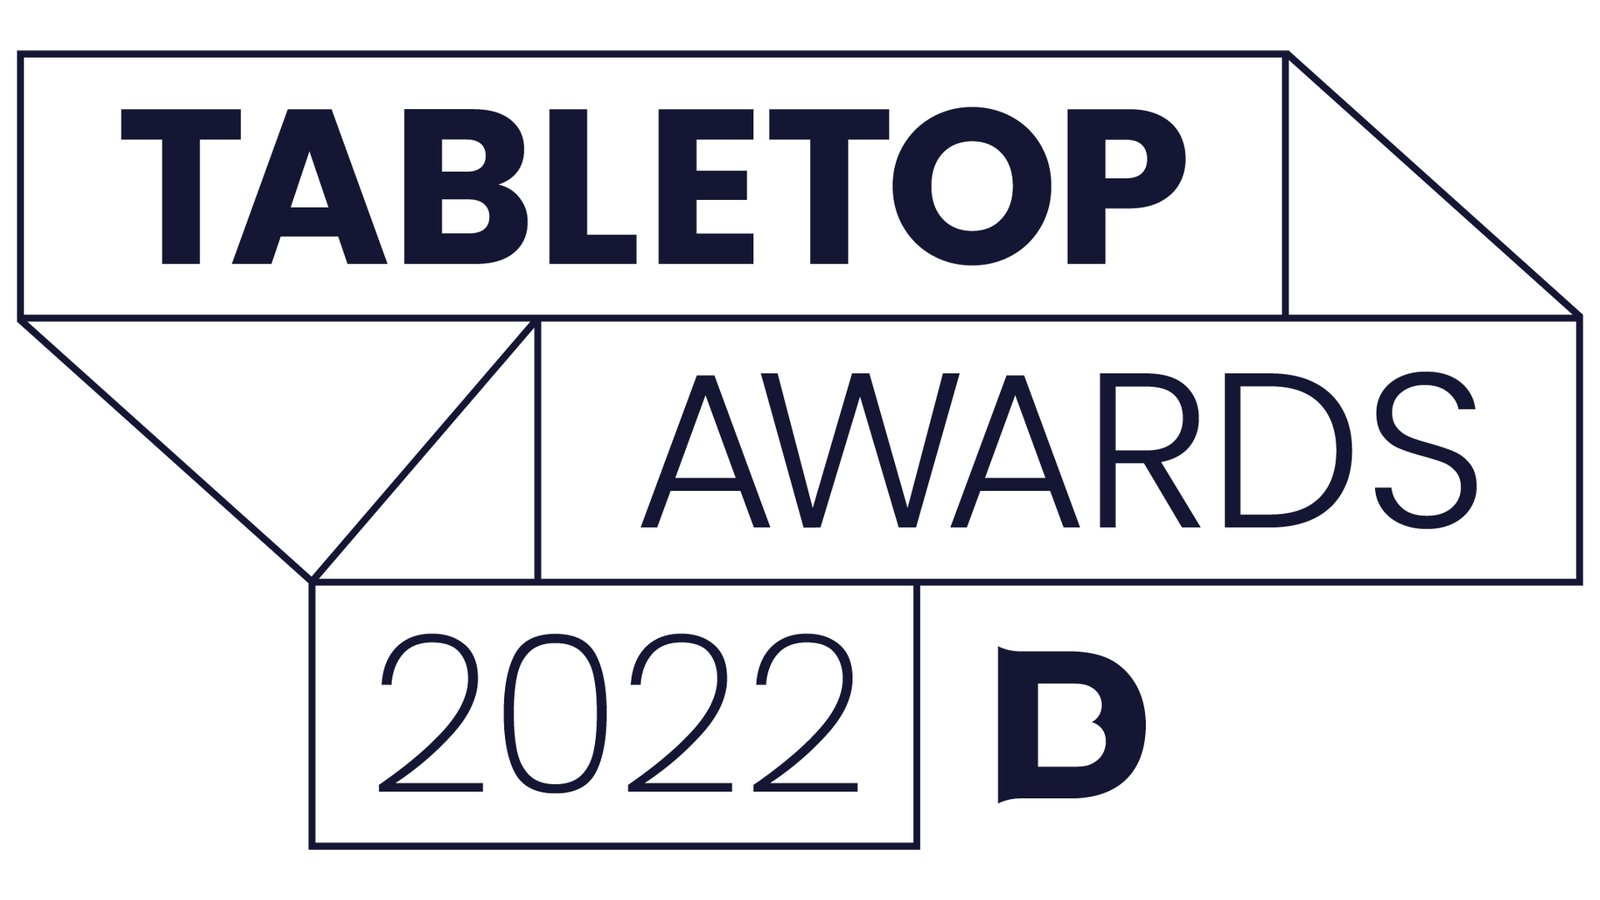 Vote for Call of Cthulhu in the 2022 Tabletop Gaming Awards - Chaosium Inc.